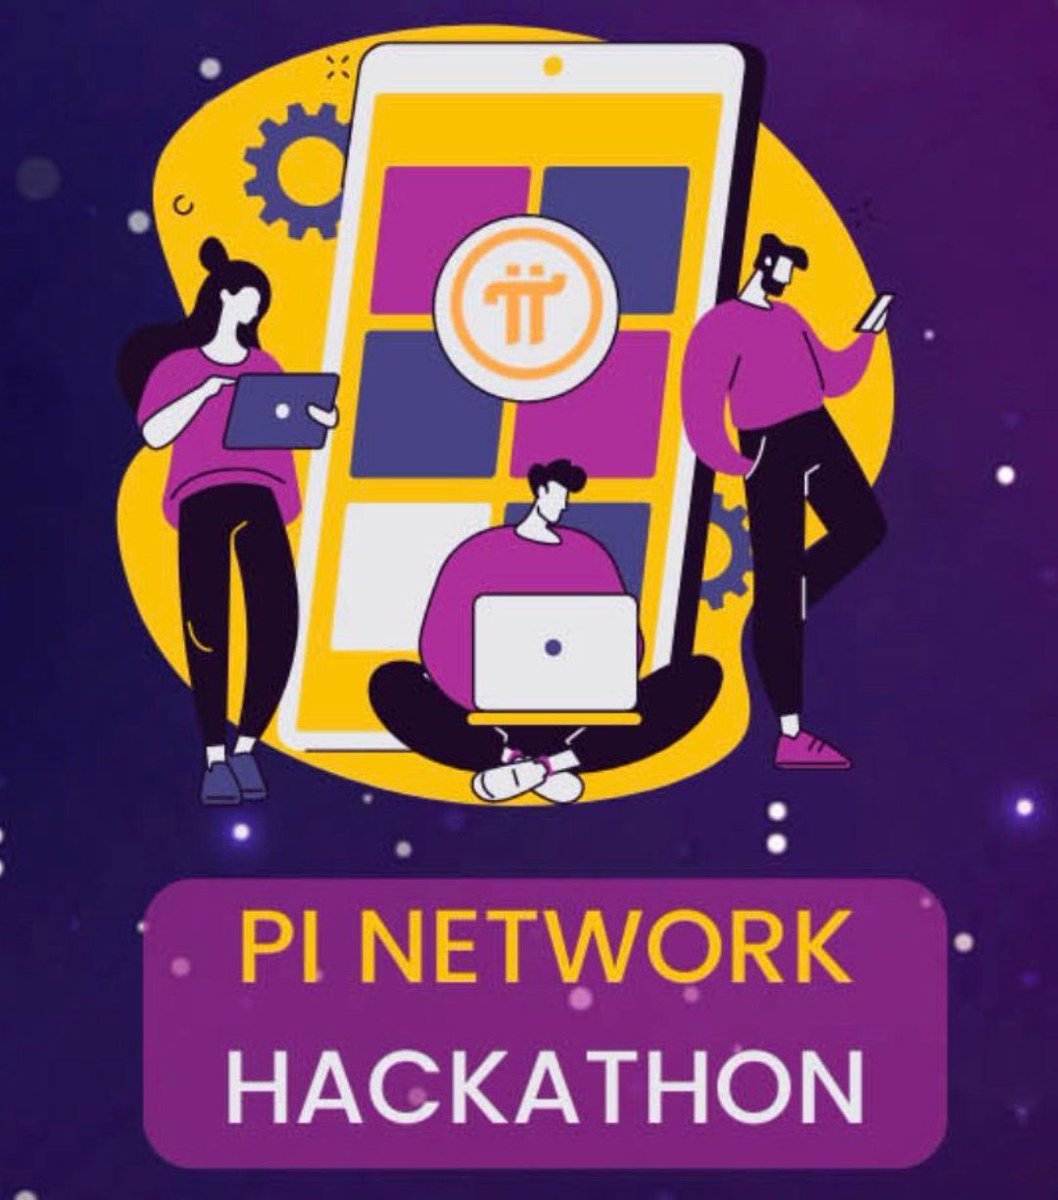 CT: The hackathon is a showcase of apps, dapps & projects building on Pi. This allows us to build a full ecosystem before mainnet so that our blockchain has immediate use-cases for Pioneers on launch. This is important to build the ecosystem first, instead of rushing. #PiNetwork